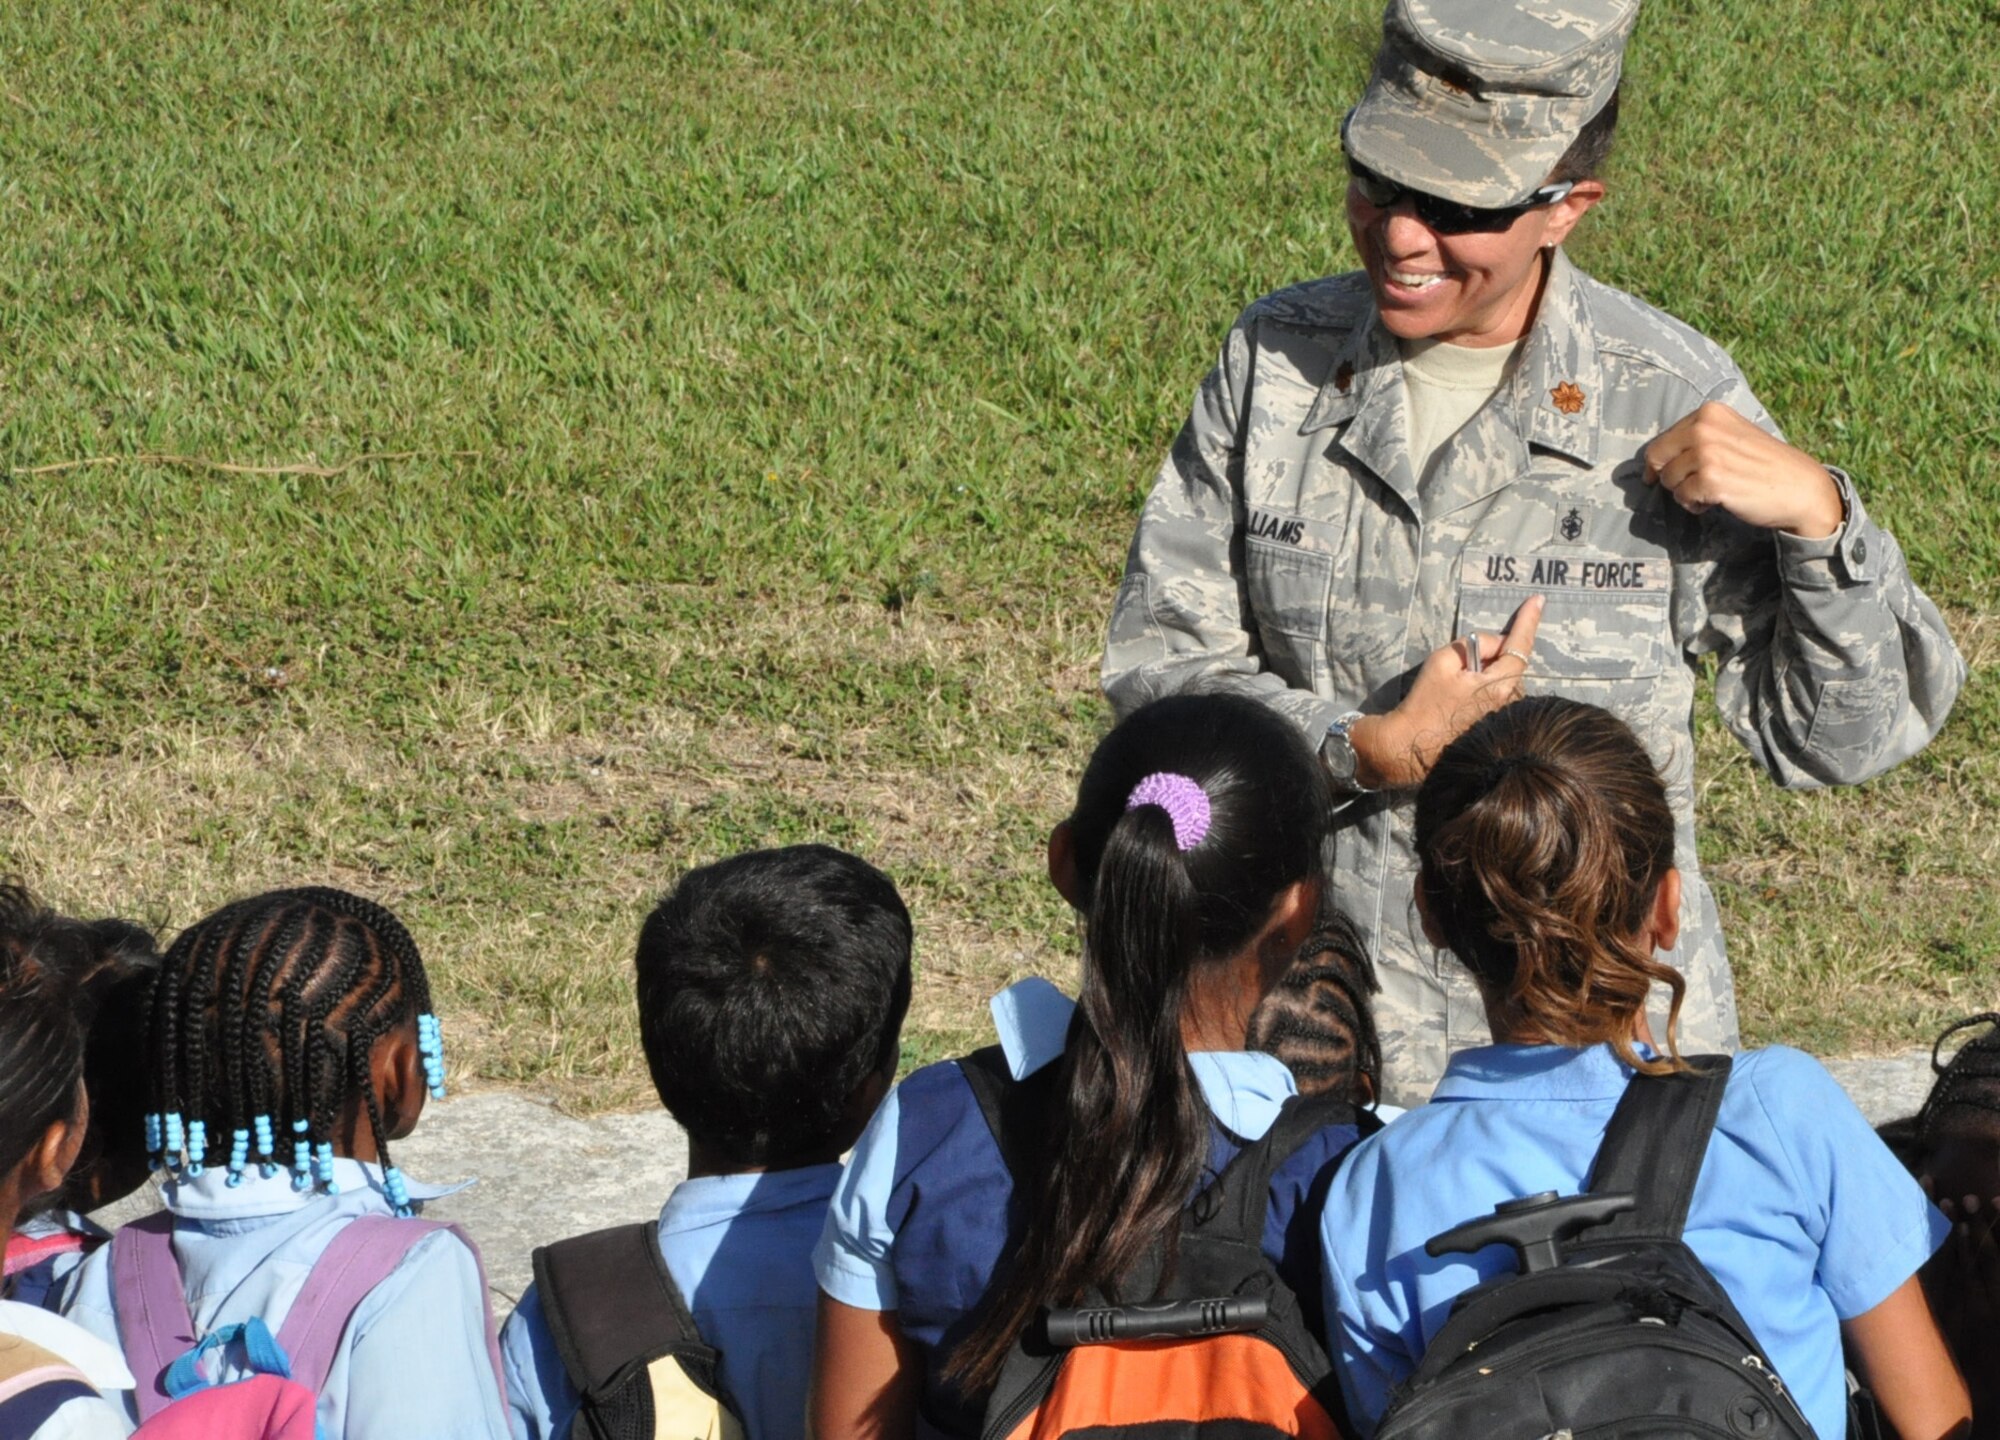 Maj. S. Kellie Williams, New Horizons Expeditionary Medical Operations Squadron deputy commander, explains her medical occupational badge and her position in the U.S. Air Force to students at the Libertad Methodist School March 24, 2014, in Libertad, Belize. Williams and other U.S. military medical representatives visited three schools in the Corozal region in preparation for upcoming medical readiness training exercises, or MEDRETES, which will incorporate the training and medical expertise of both Belizean and U.S. medical professionals as they learn from one another to provide medical care to residents near Chunox, Progresso and Libertad. (U.S. Air Force photo by Tech. Sgt. Kali L. Gradishar/Released)